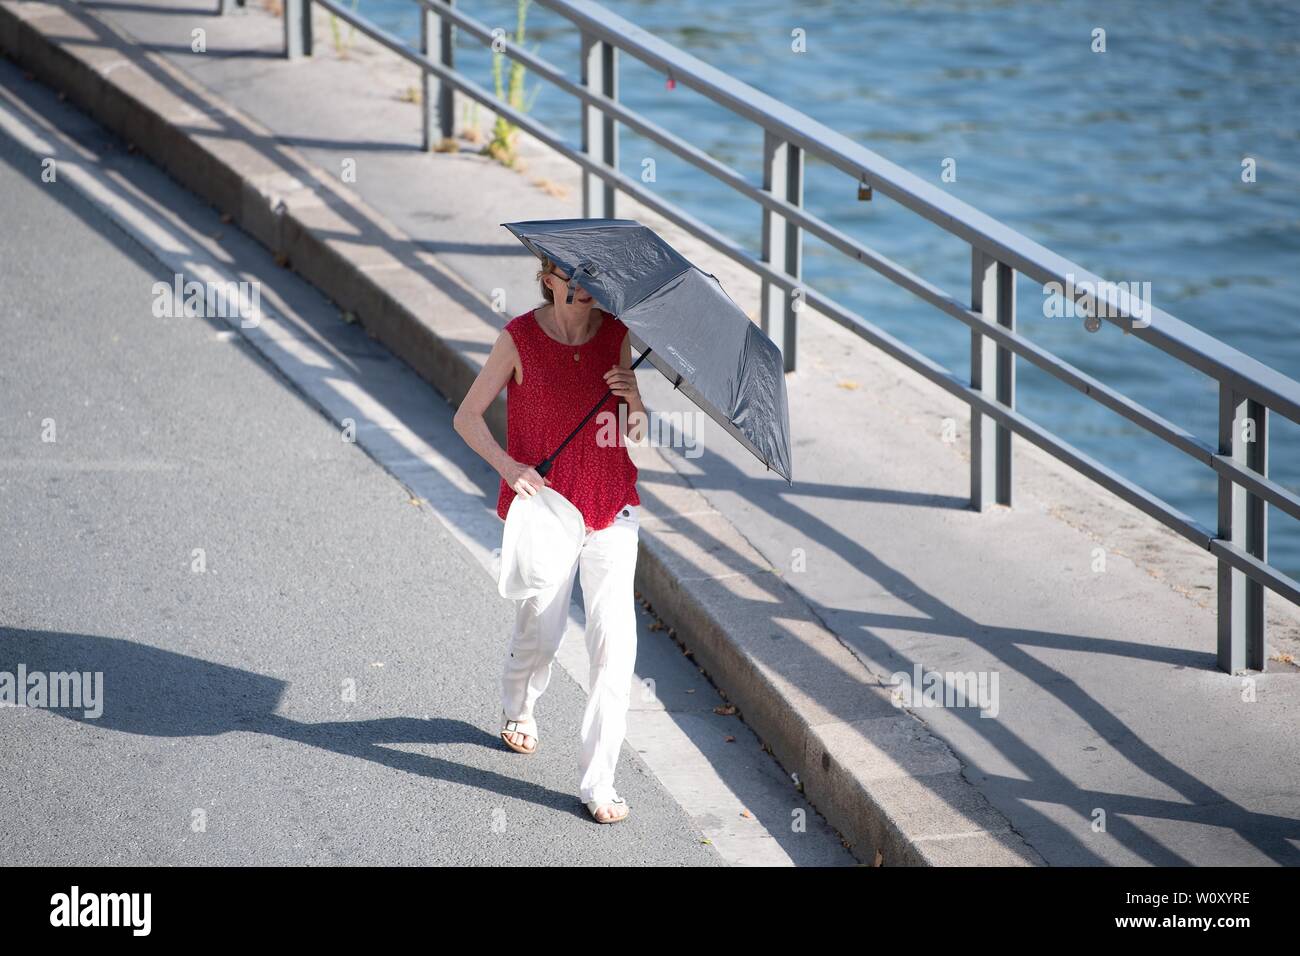 Paris, France. 27th June, 2019. A woman walks with a sunshade in Paris, France, June 27, 2019. The national weather center, Meteo France, on Thursday warned of "exceptional heat peak" on June 28, placing 4 southern regions on red alert, the highest alert on the agency's four-scale system, and urges residents to be extremely vigilant. While 76 other regions, except Brittany, in northwest France, remain on orange alert till next week. Credit: Jack Chan/Xinhua/Alamy Live News Stock Photo